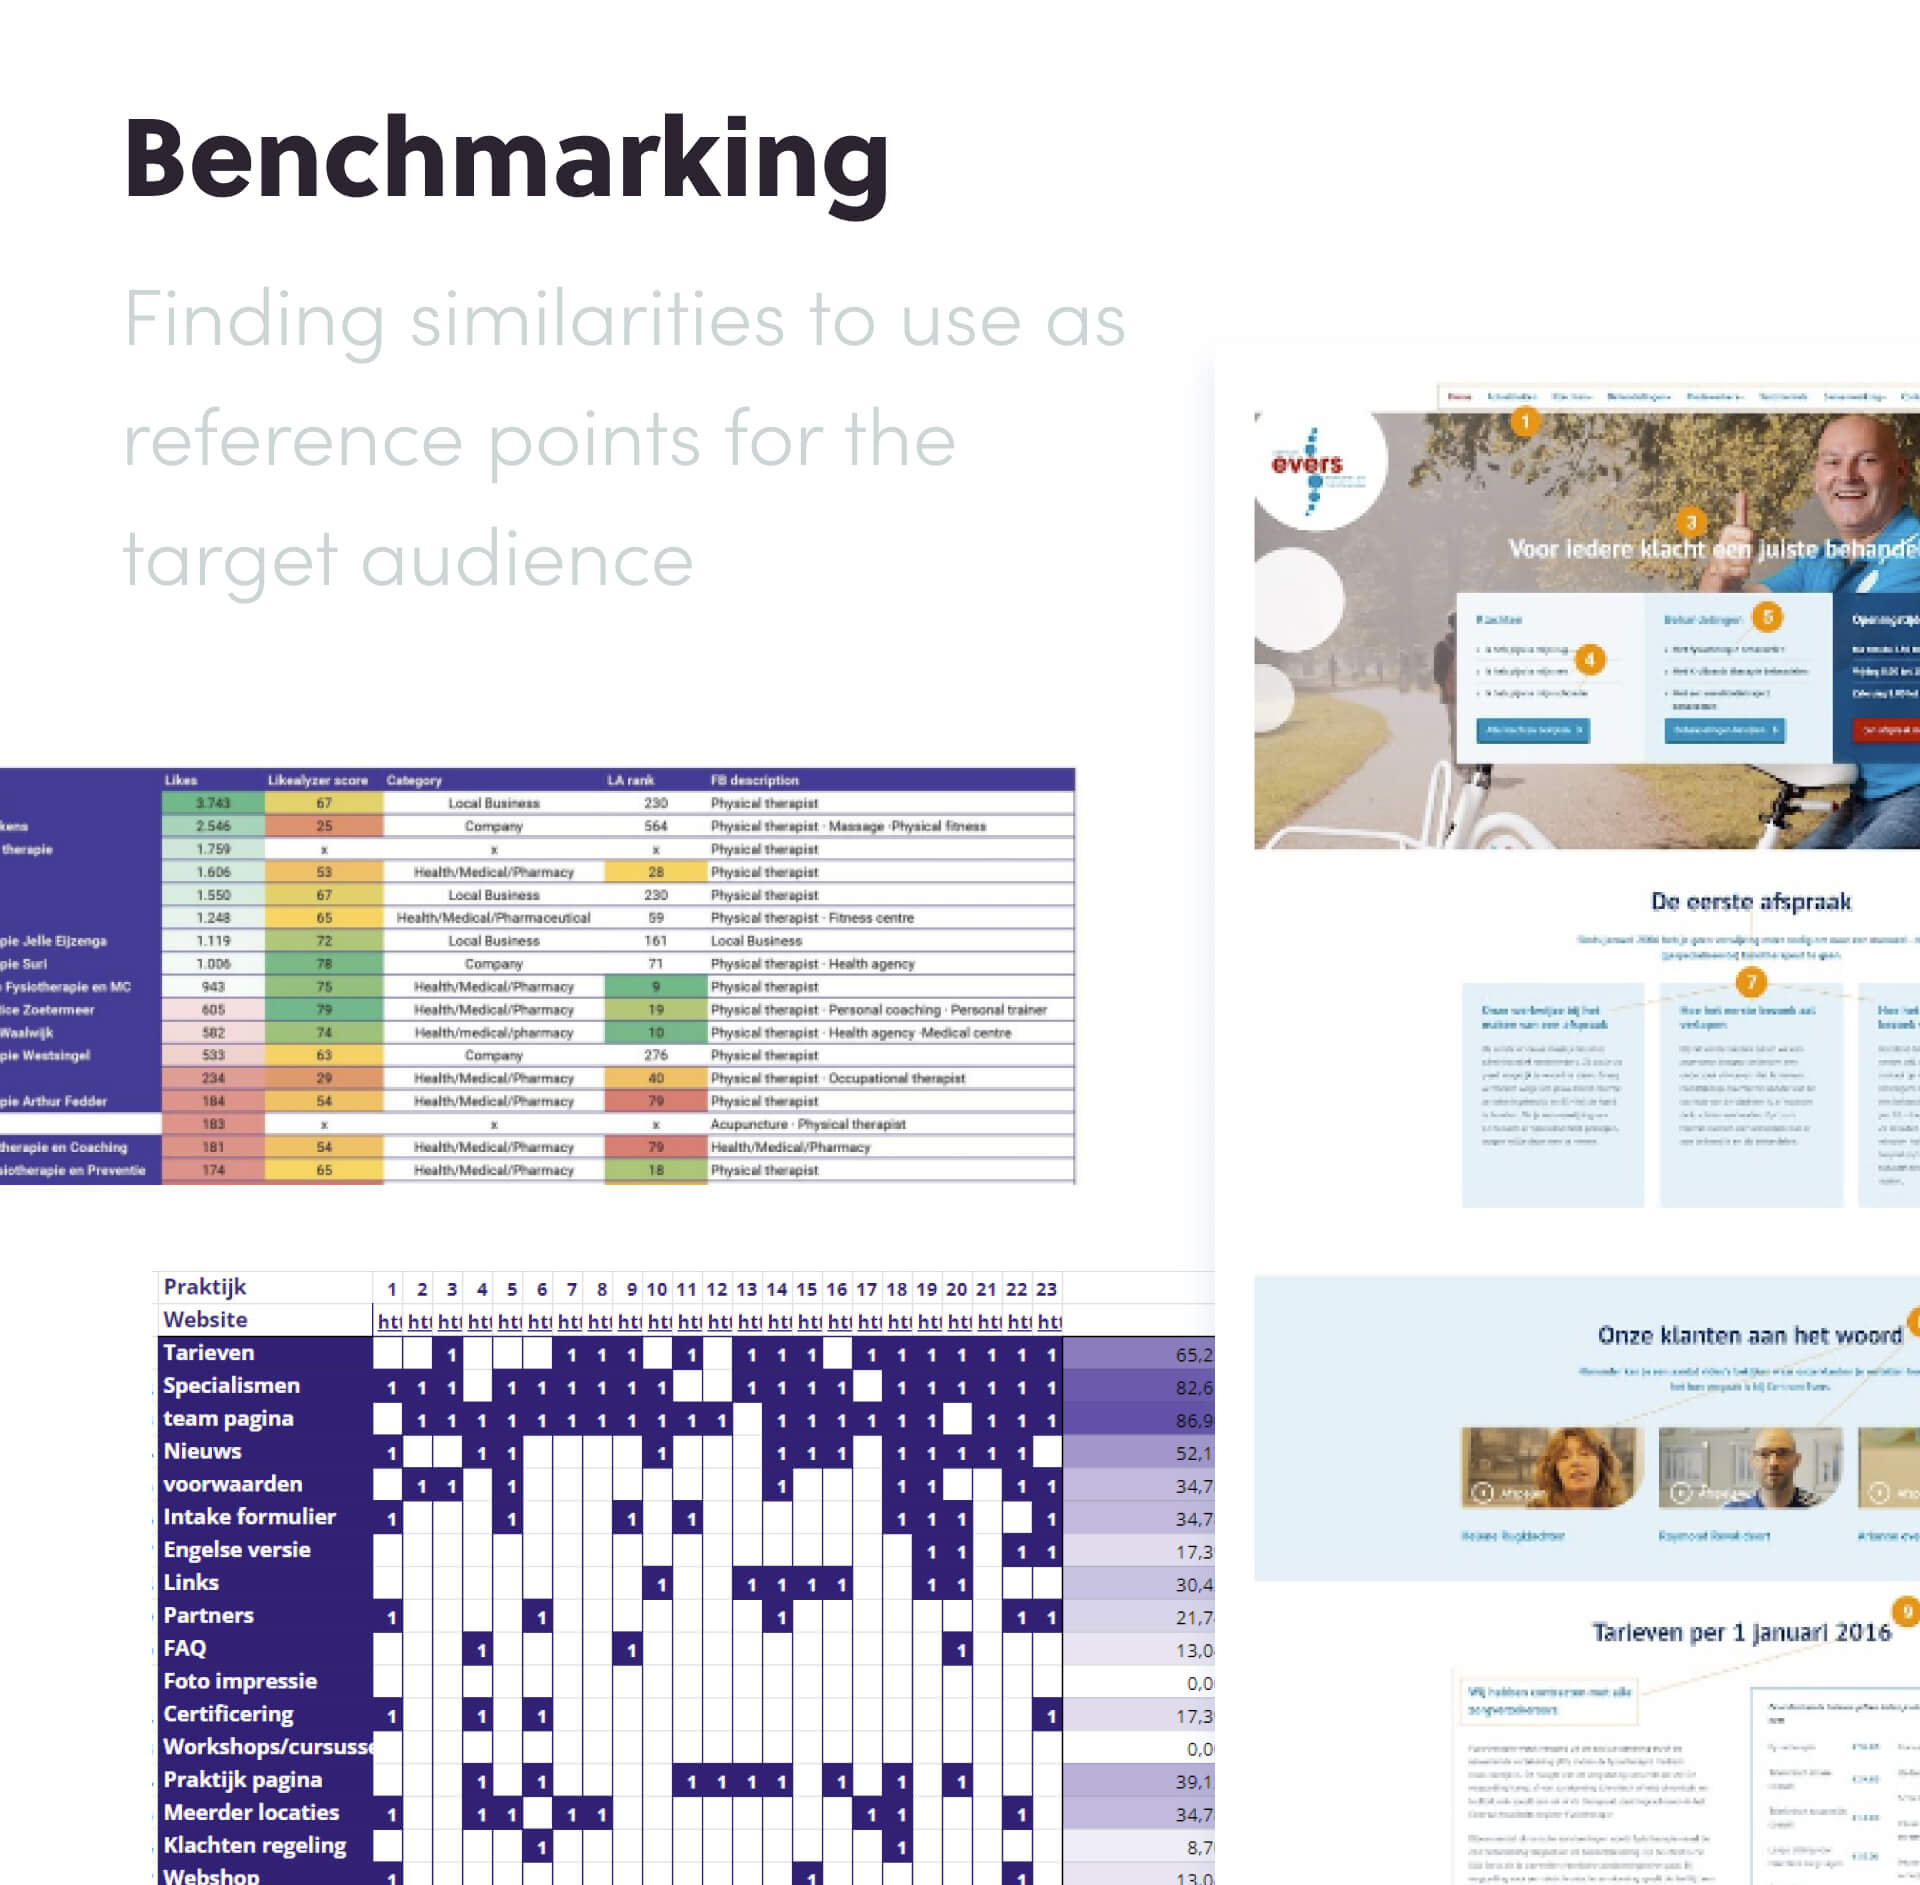 Benchmarking presentation slide showing charts, tables, and website screenshots for marketing analysis.